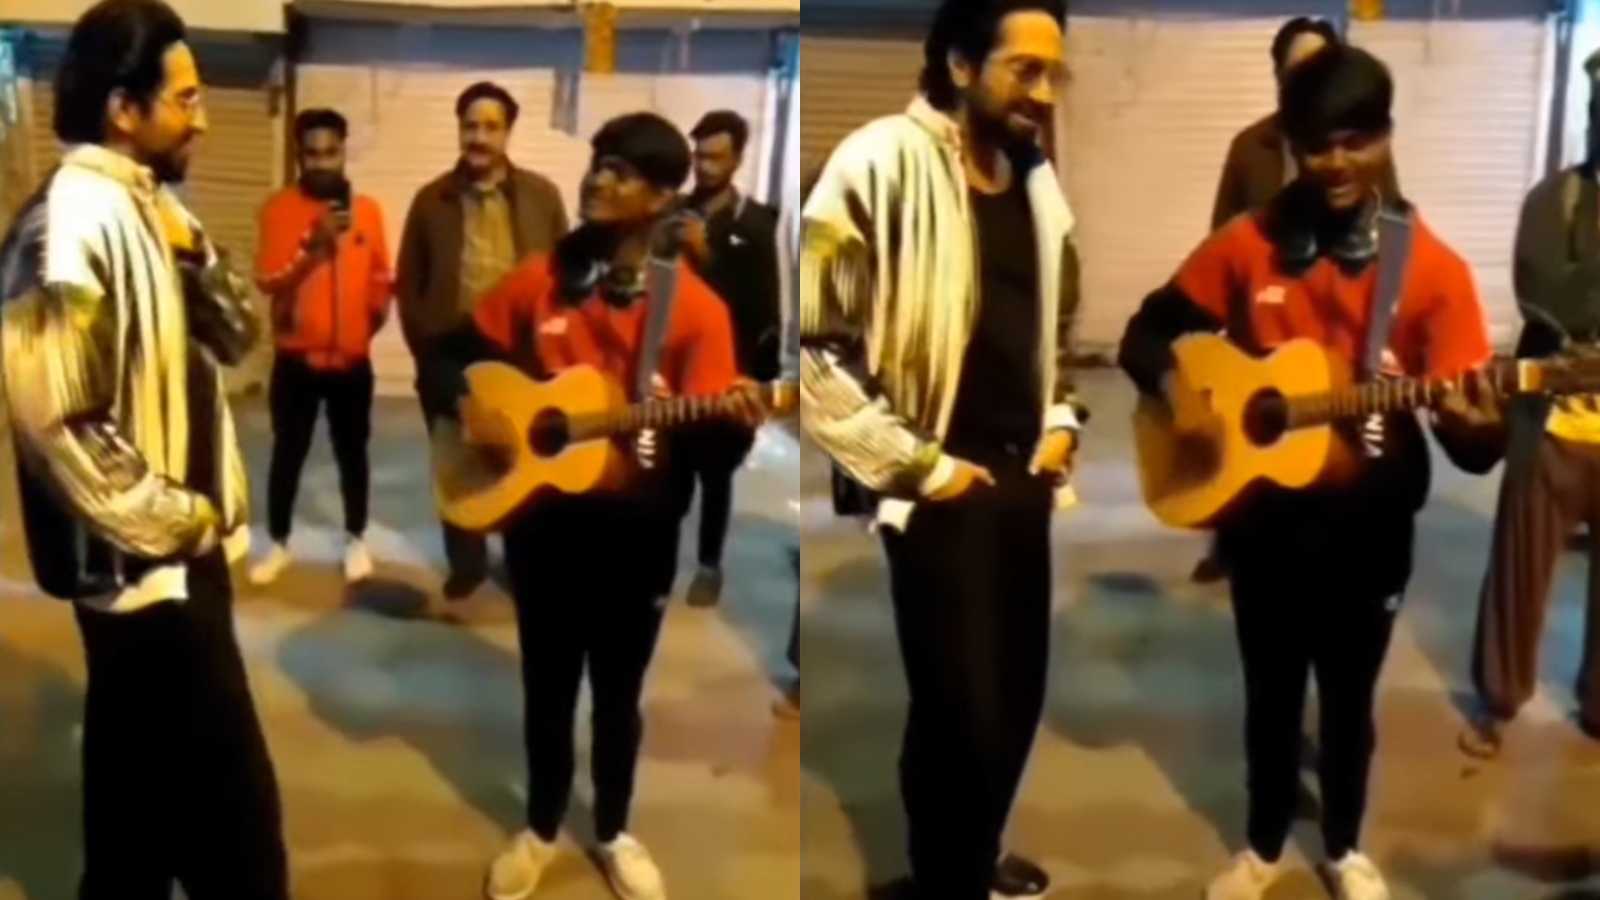 Ayushmann Khurrana jams with a fan singing 'Paani Da Rang' in an impromptu session in Delhi streets; Watch viral video